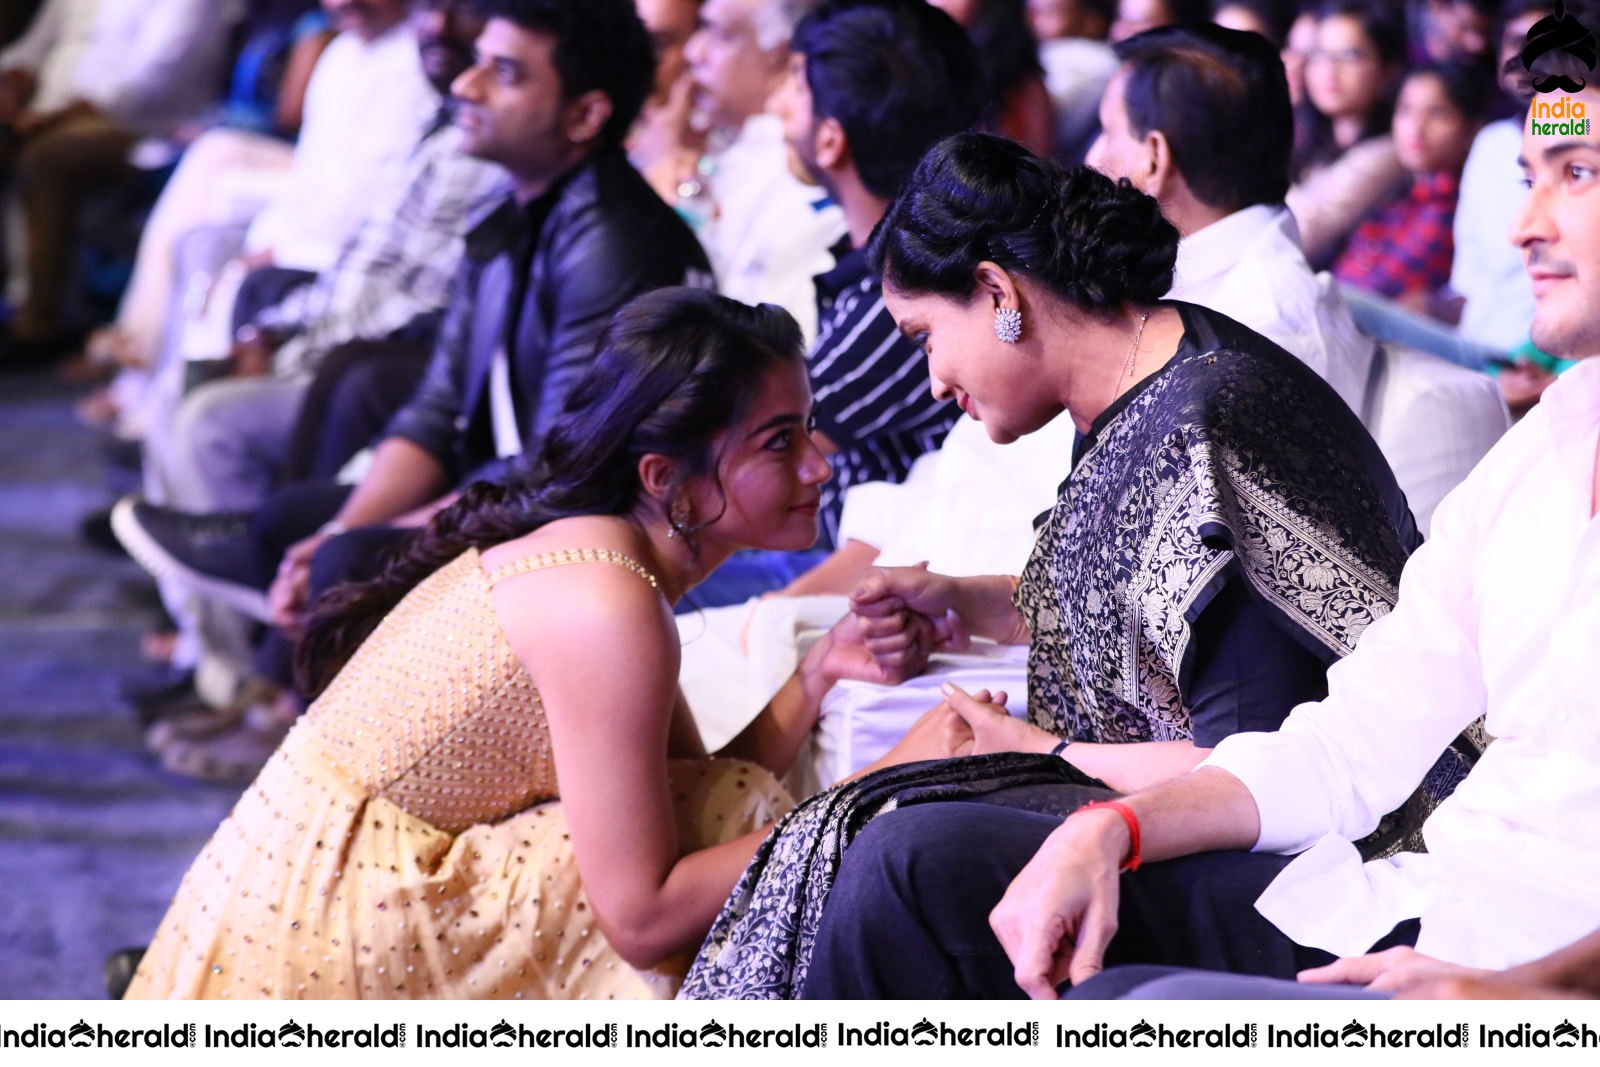 Cute Rashmika Kneels and Chats with Chiranjeevi and Vijayashanthi at the event